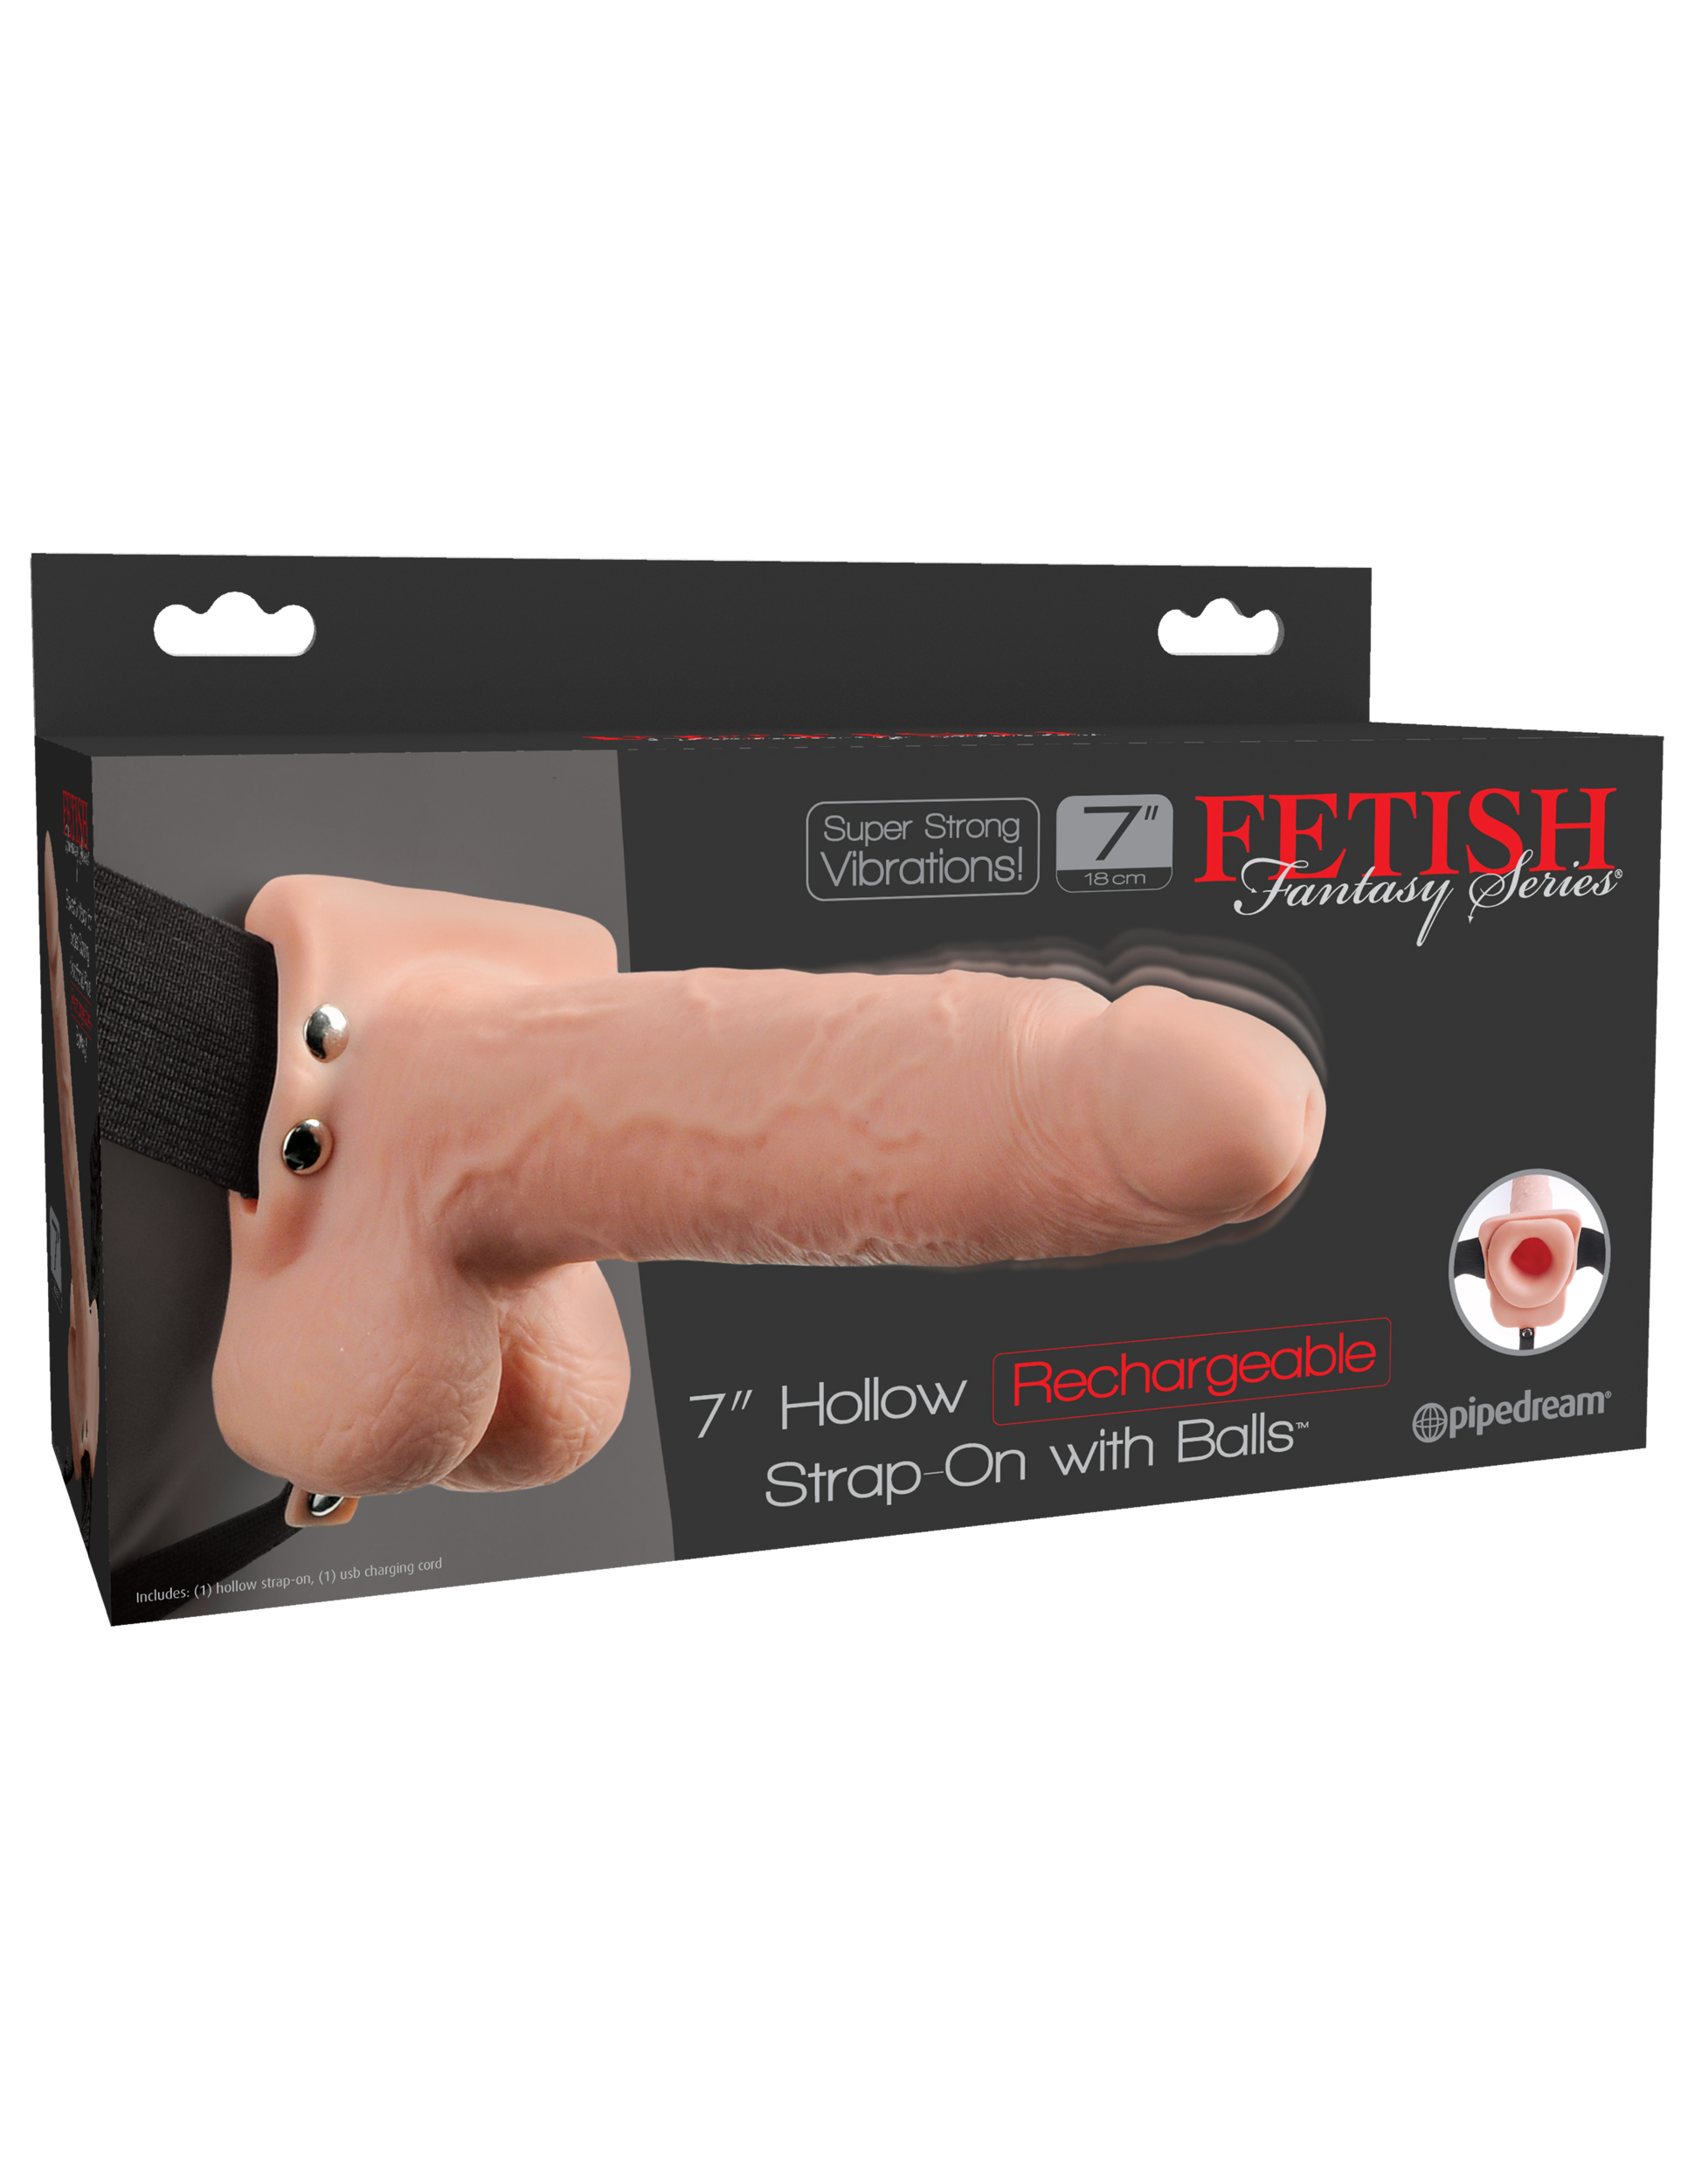 Fetish Fantasy 7" Hollow Rechargeable Strap On w Balls